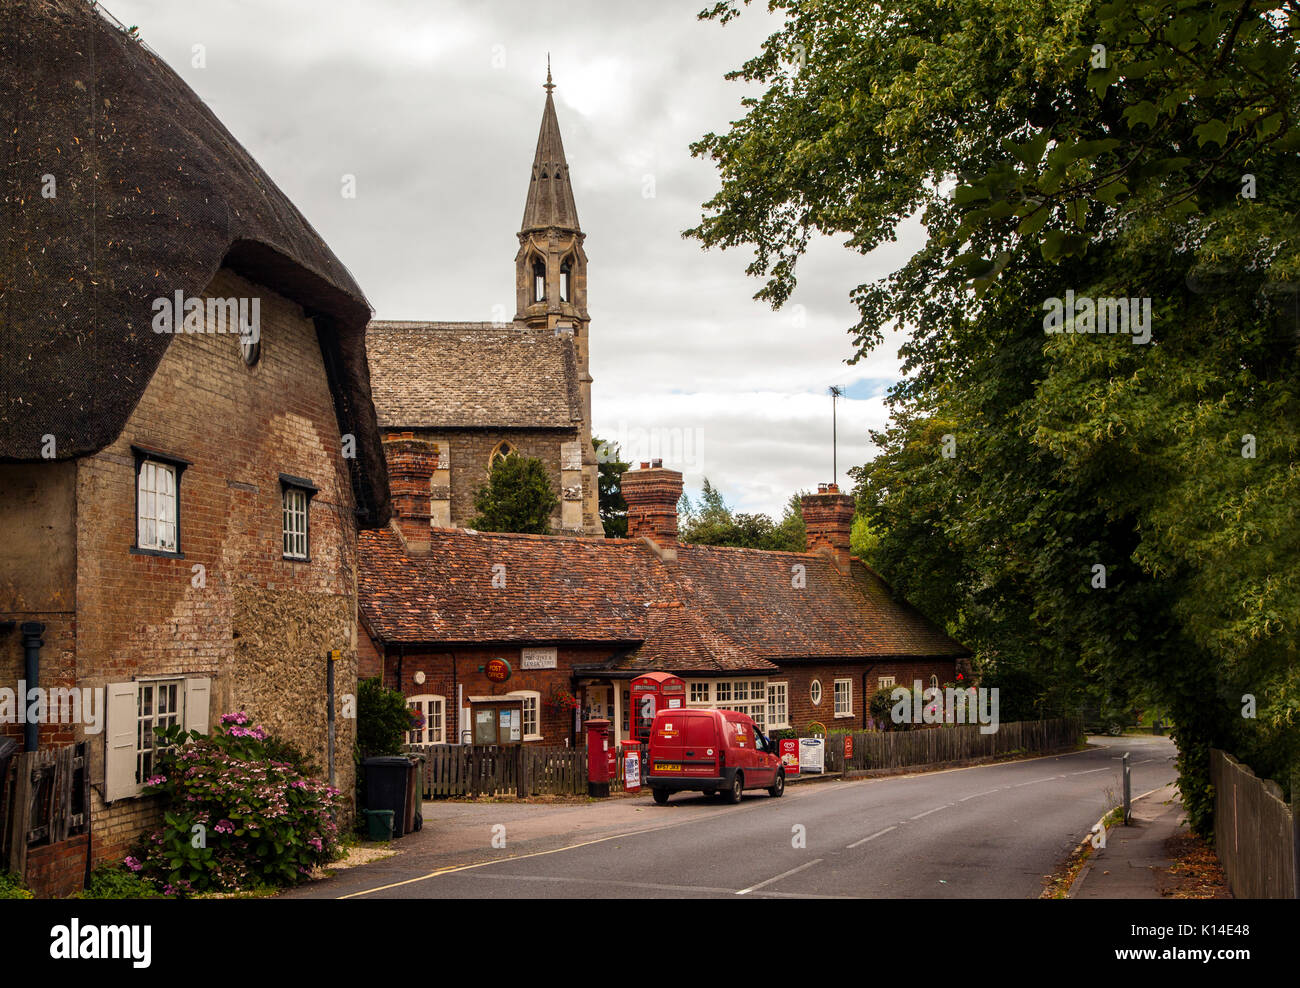 Clifton Hampden village post office and general stores in Oxfordshire with red phone box and red round post box outside now serving tea and coffee Stock Photo